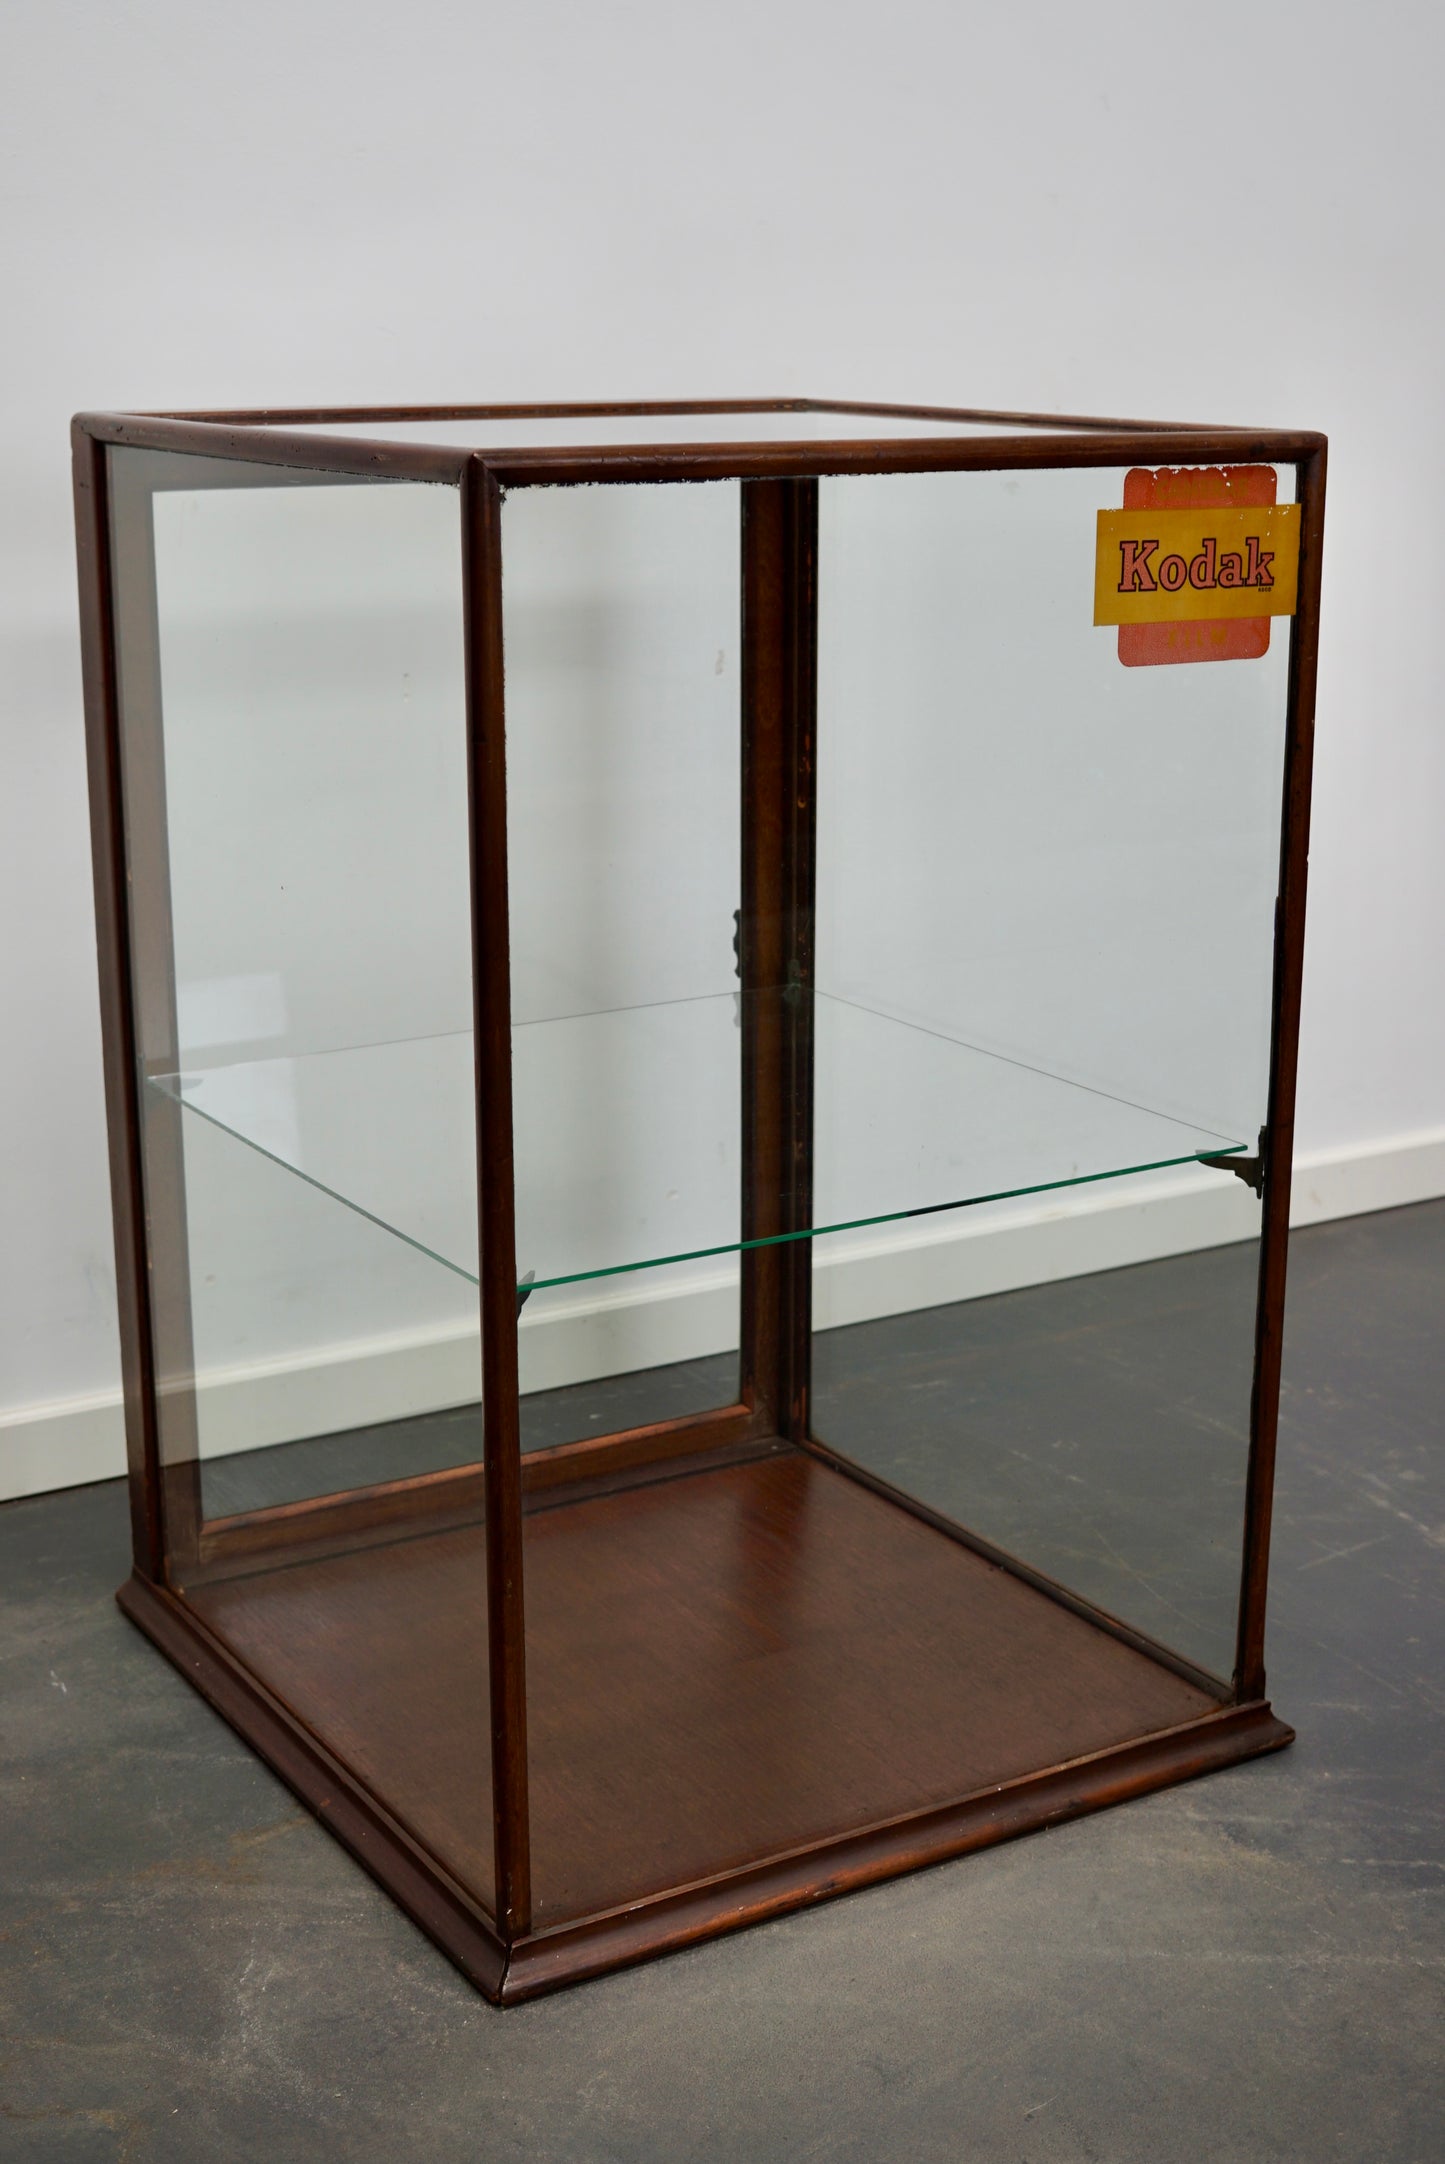 Victorian Mahogany Museum / Shop Display Cabinet or Vitrine, Late 19th Century